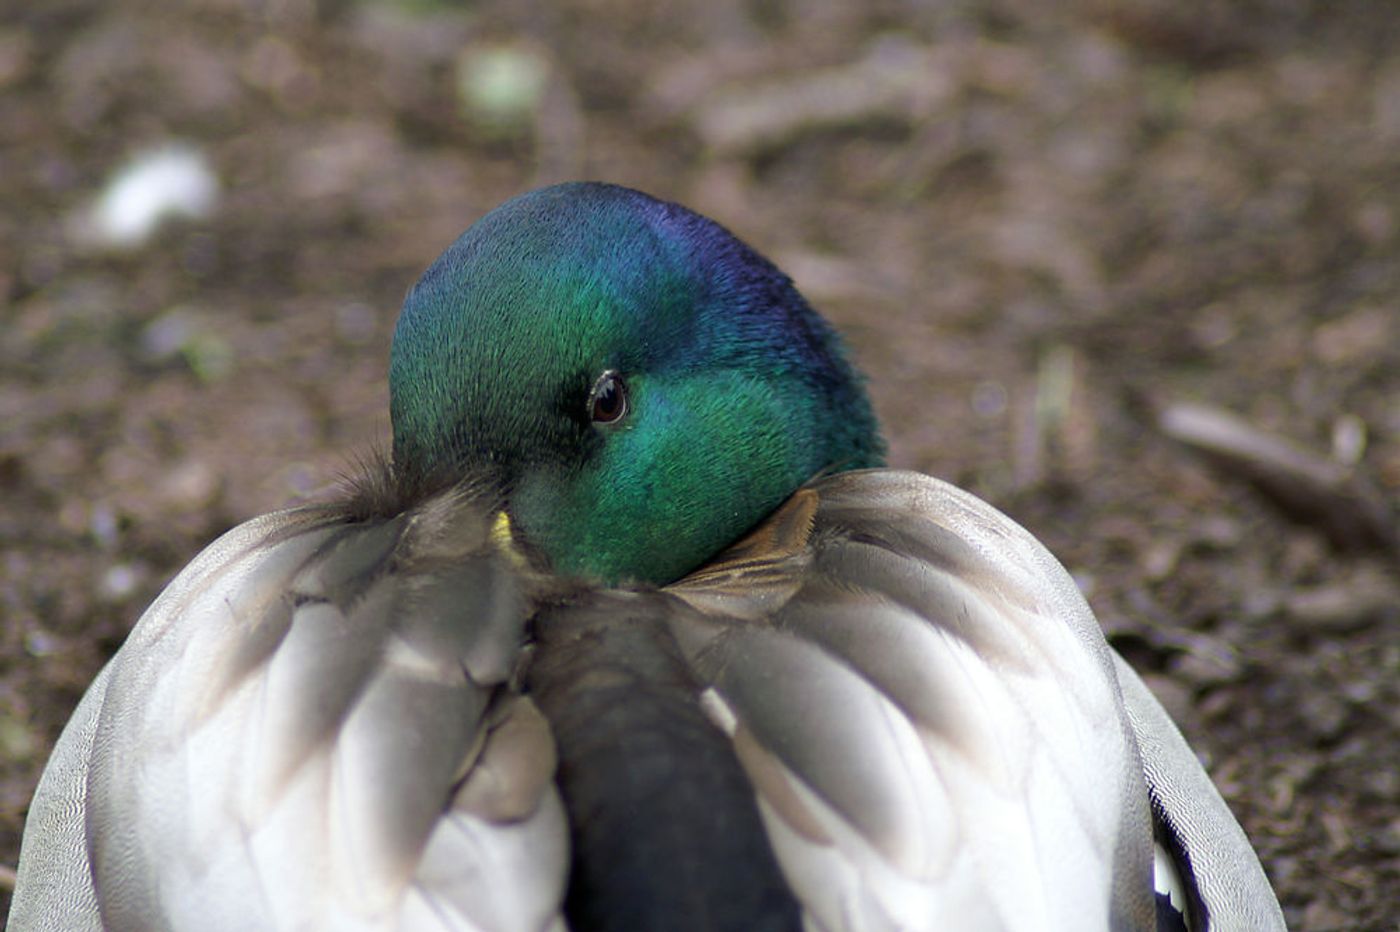 A duck tries to keep its bill warm by tucking it underneath its feathers to preserve body heat.